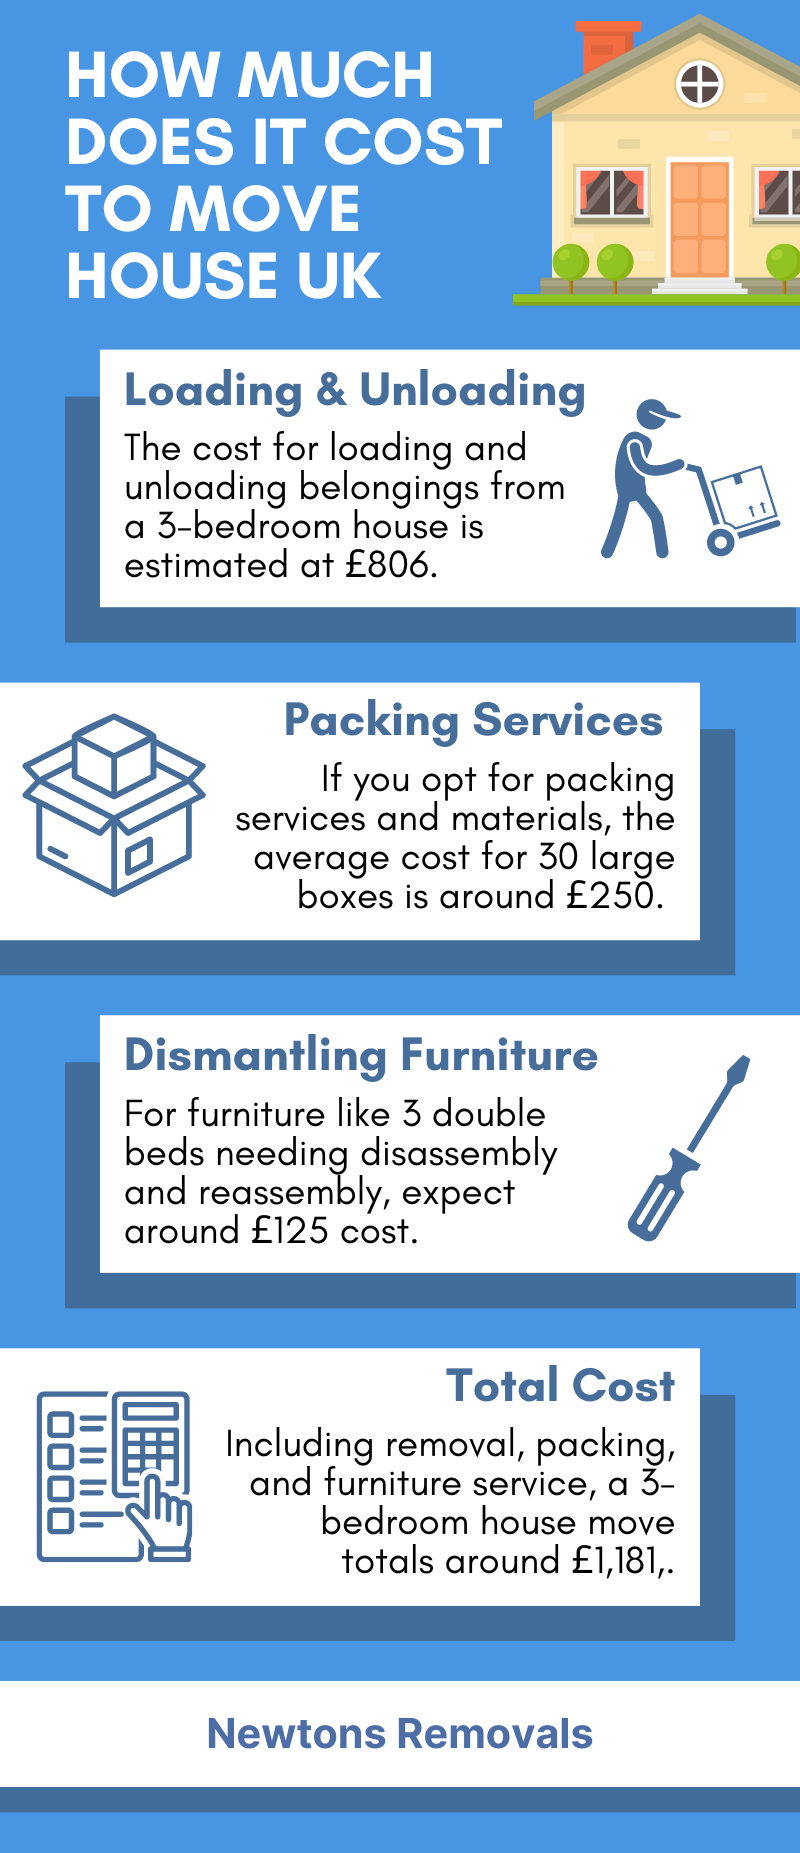 How Much Does It Cost To Move House Uk